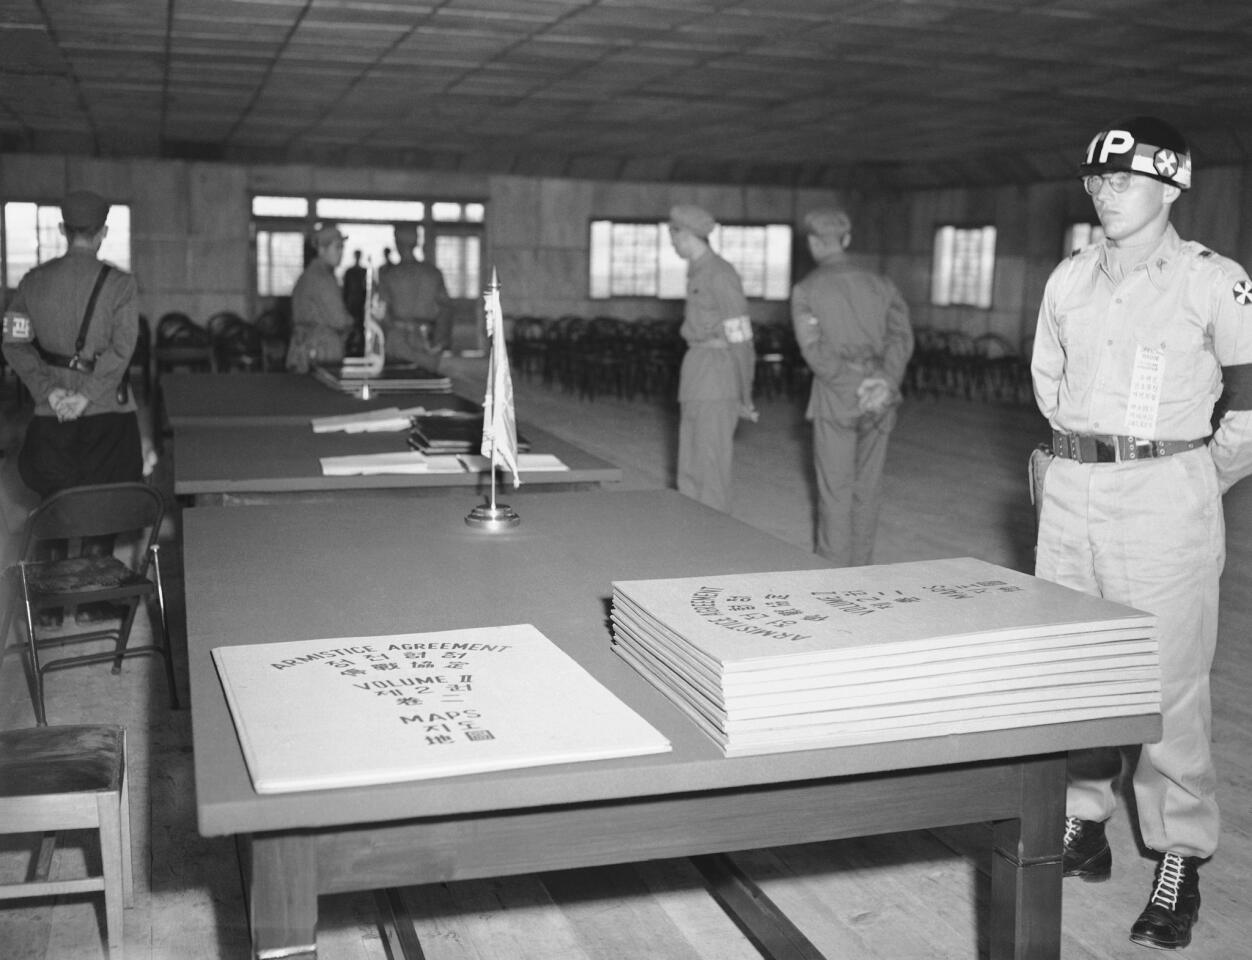 Lt. Martin H. Petersen of Franklin Park, N.Y., an MP on special detail, stands guard over the still-secret armistice documents as they lie on a table inside the armistice building at Panmunjom waiting to be signed by U.N. and Communist delegates. In background are North Korean security guards.